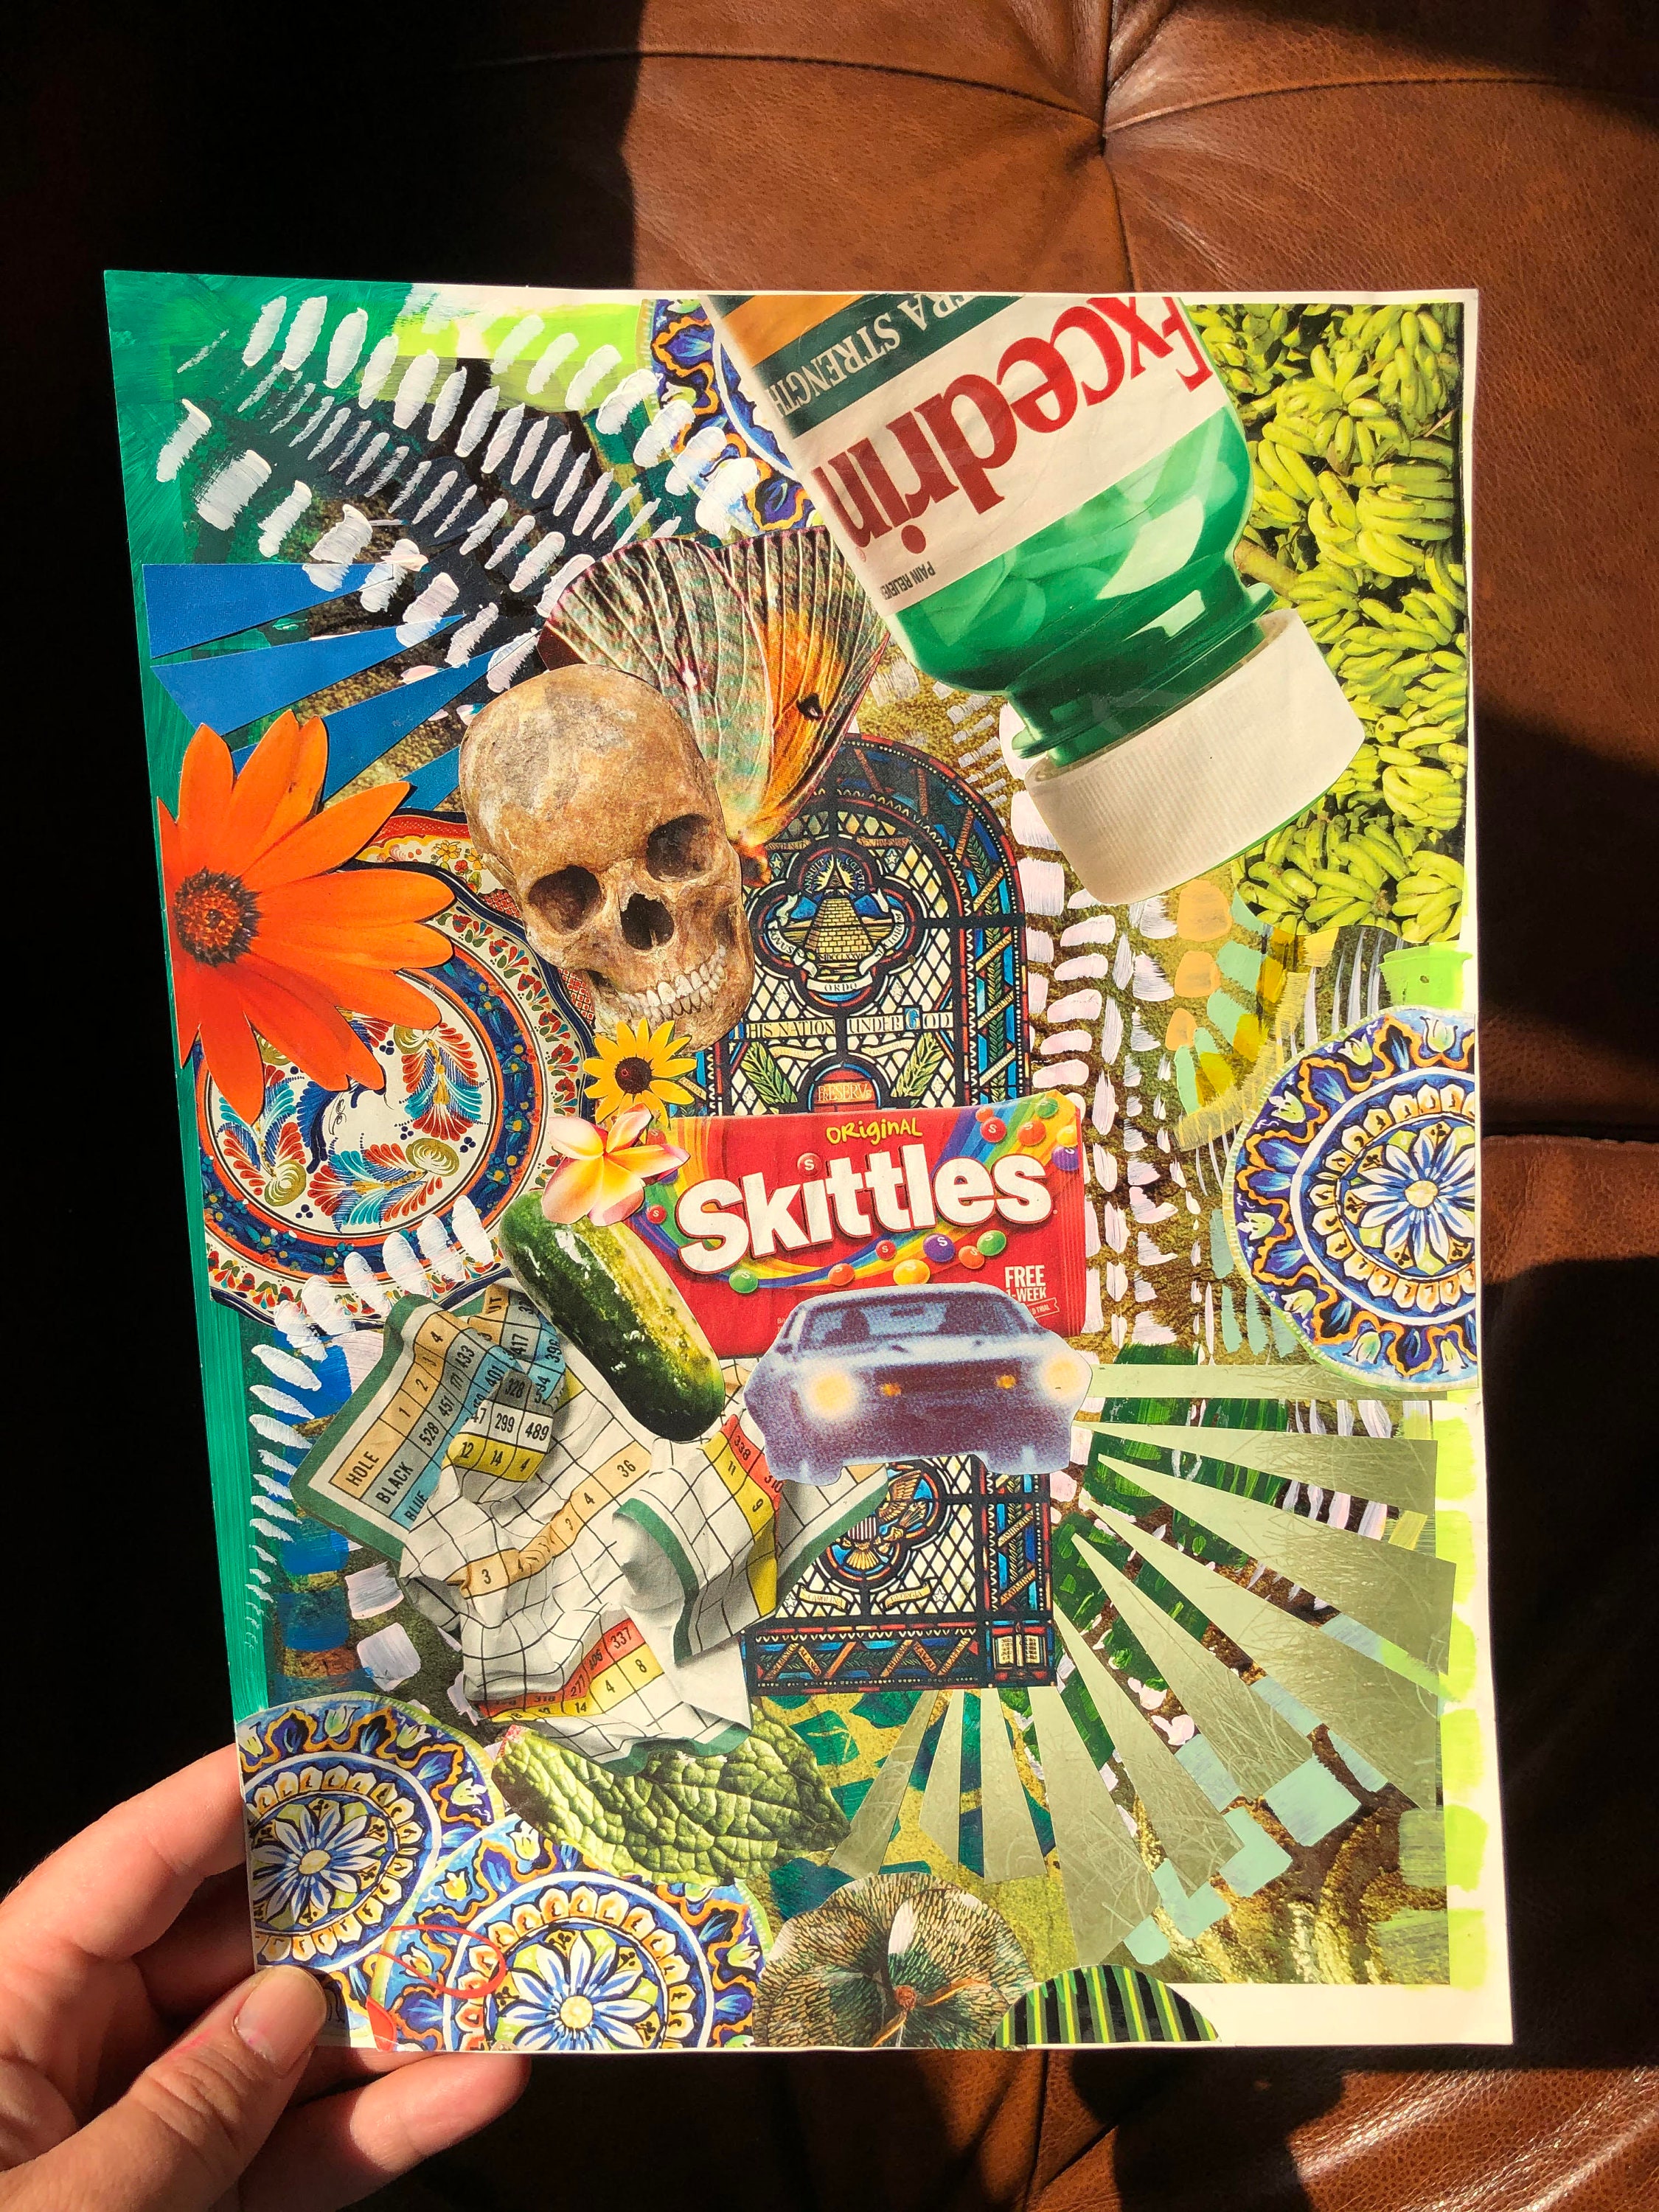 Are you looking for collage artist? - Sammielee Art - Medium